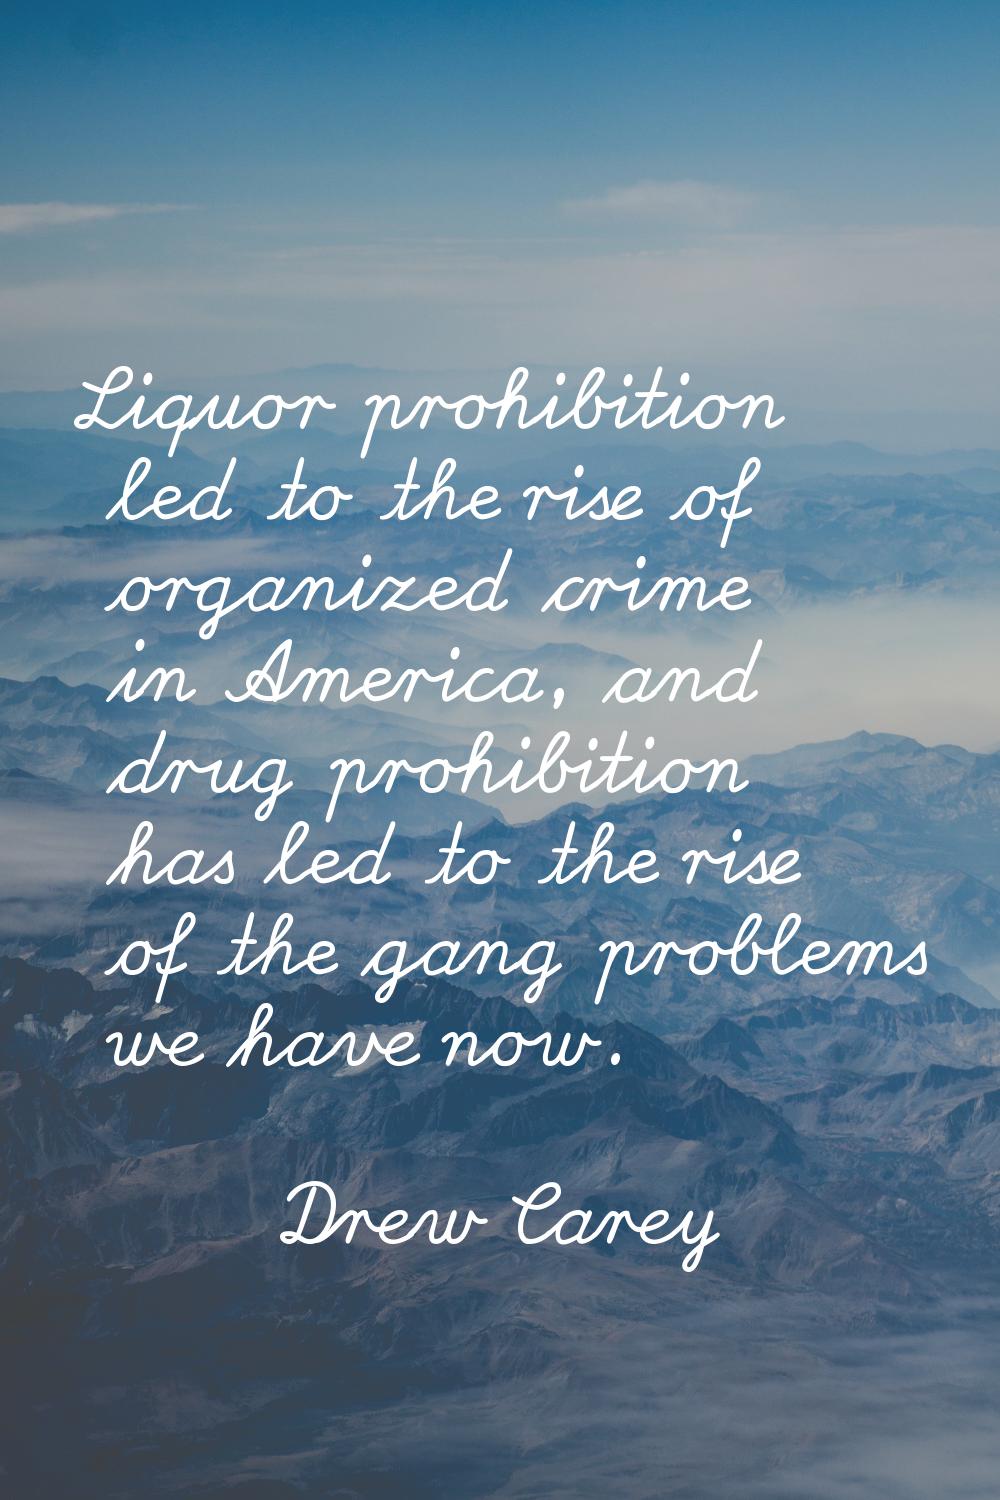 Liquor prohibition led to the rise of organized crime in America, and drug prohibition has led to t